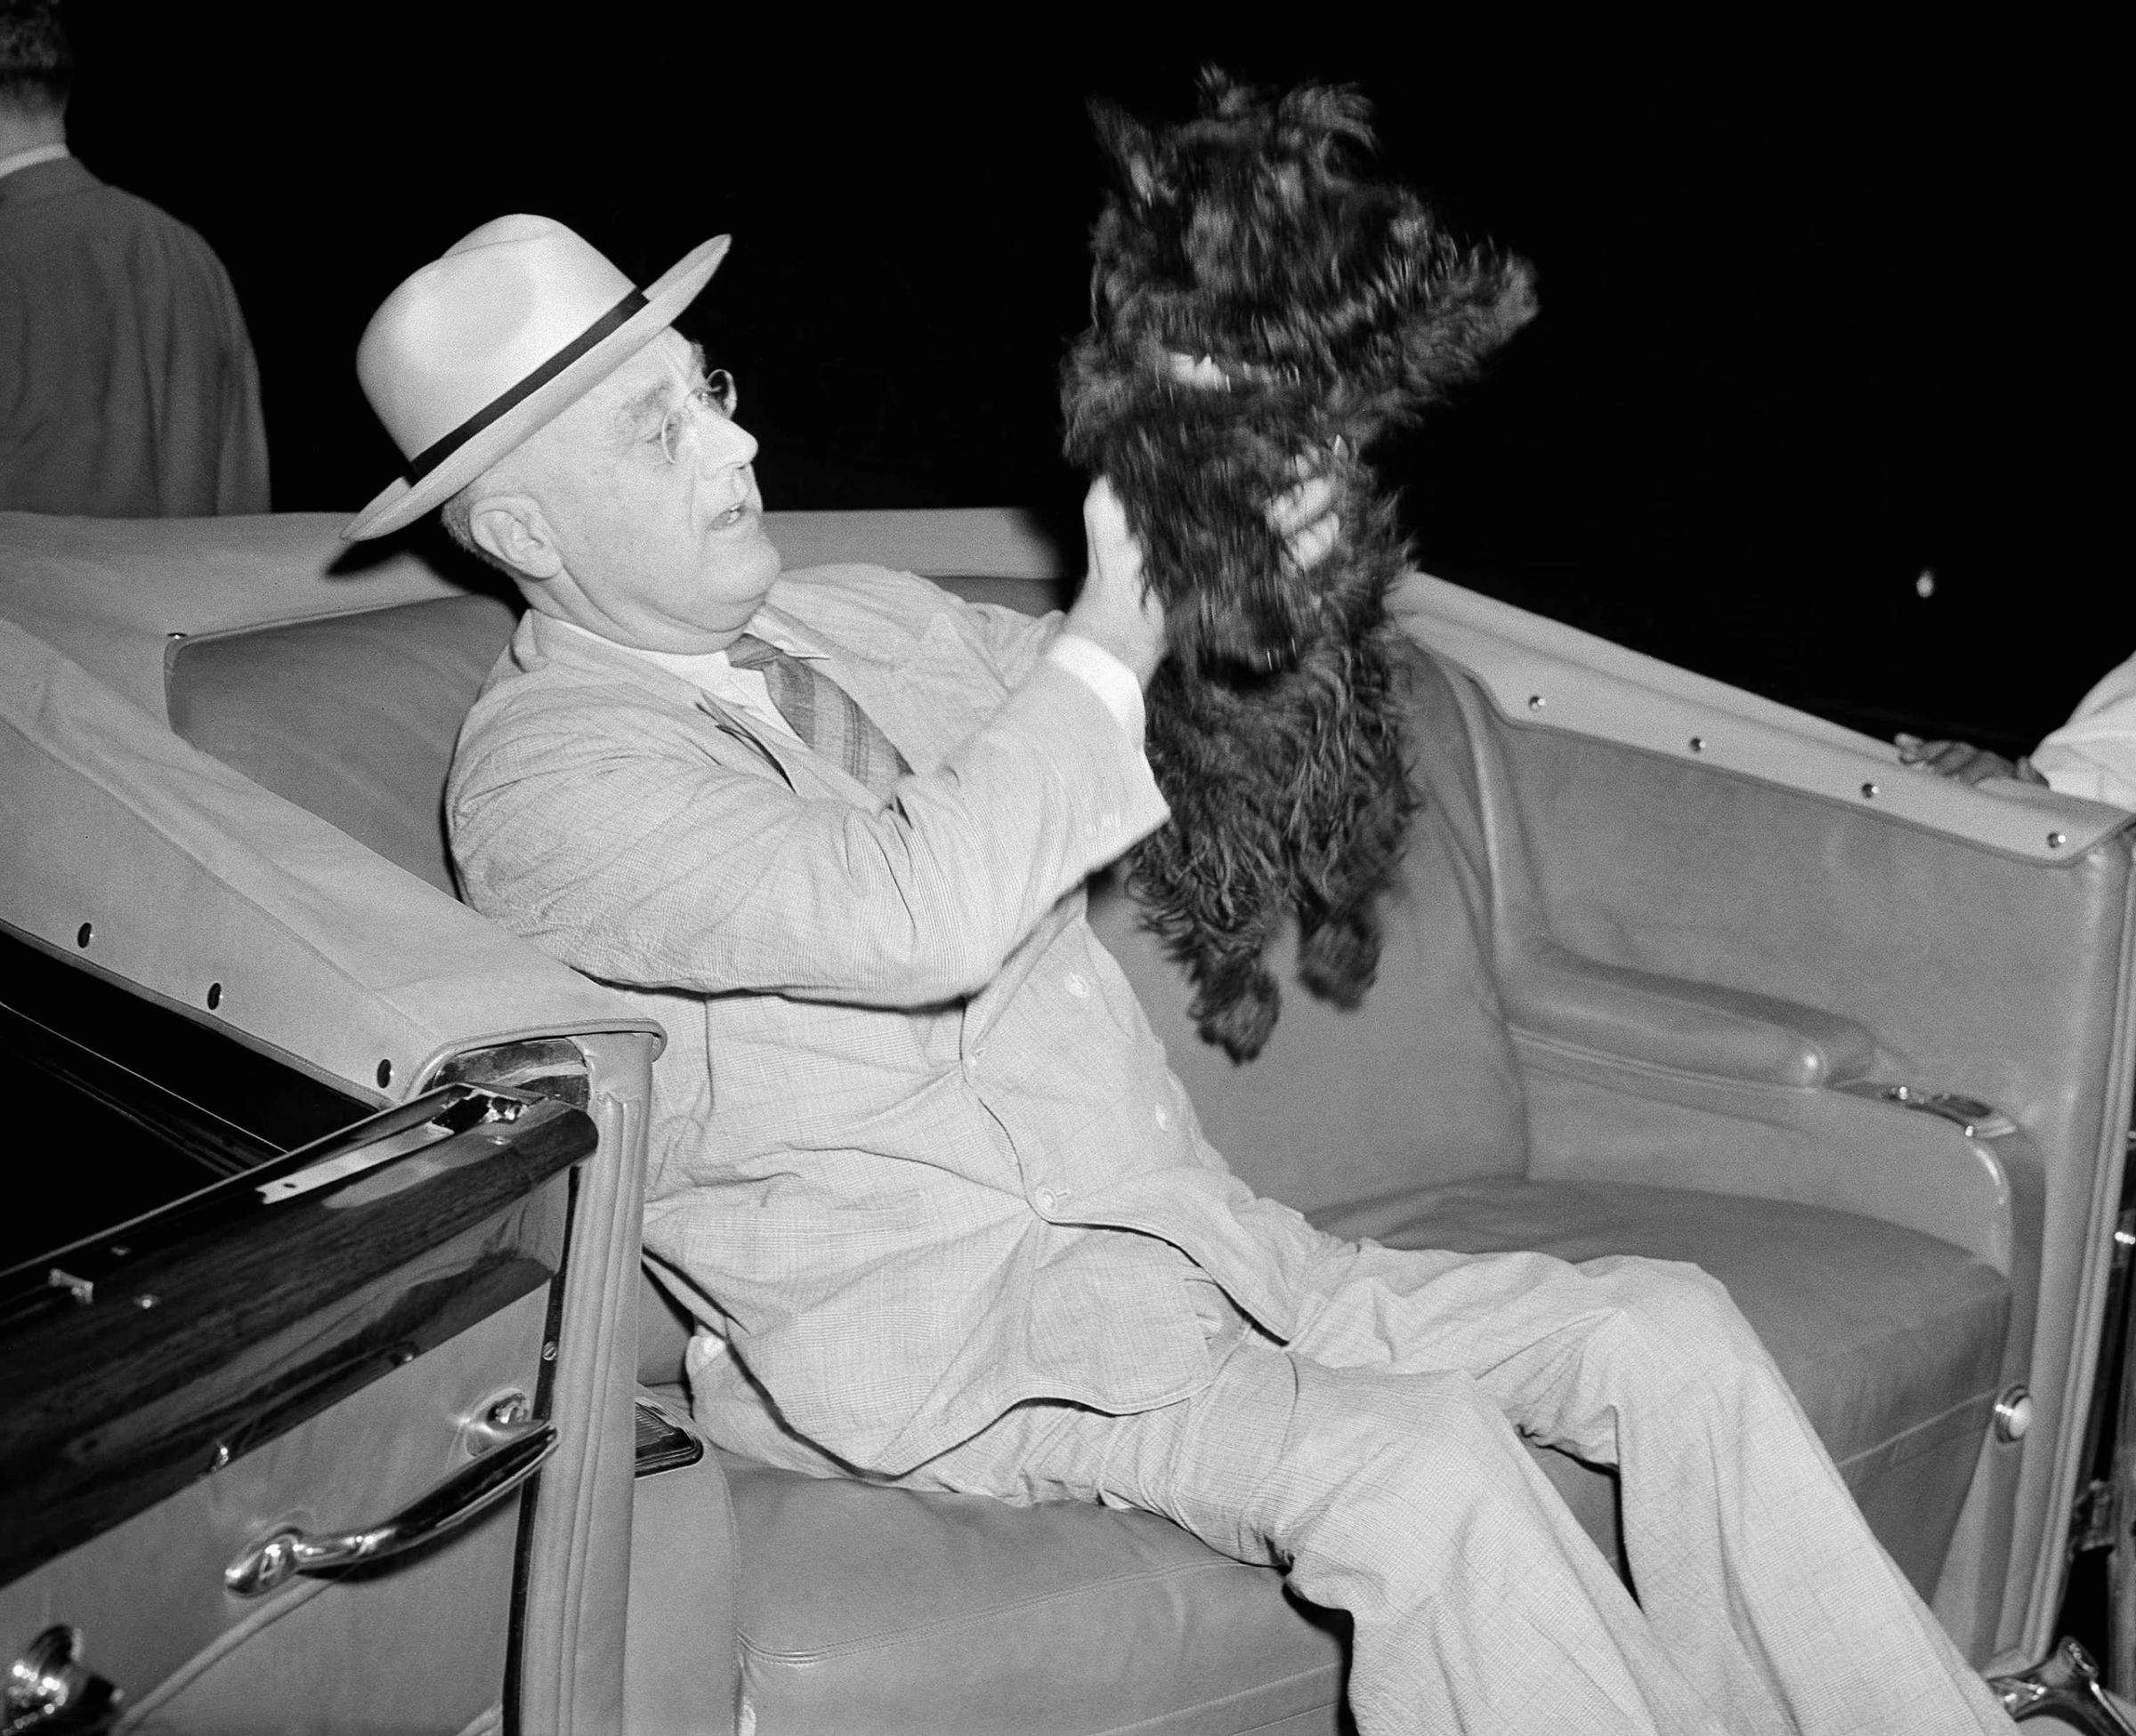 Franklin D. Roosevelt lifts his dog, Fala, as he prepares to motor from his special train to the Yacht Potomac in New London, Connecticut, Aug. 3, 1941.